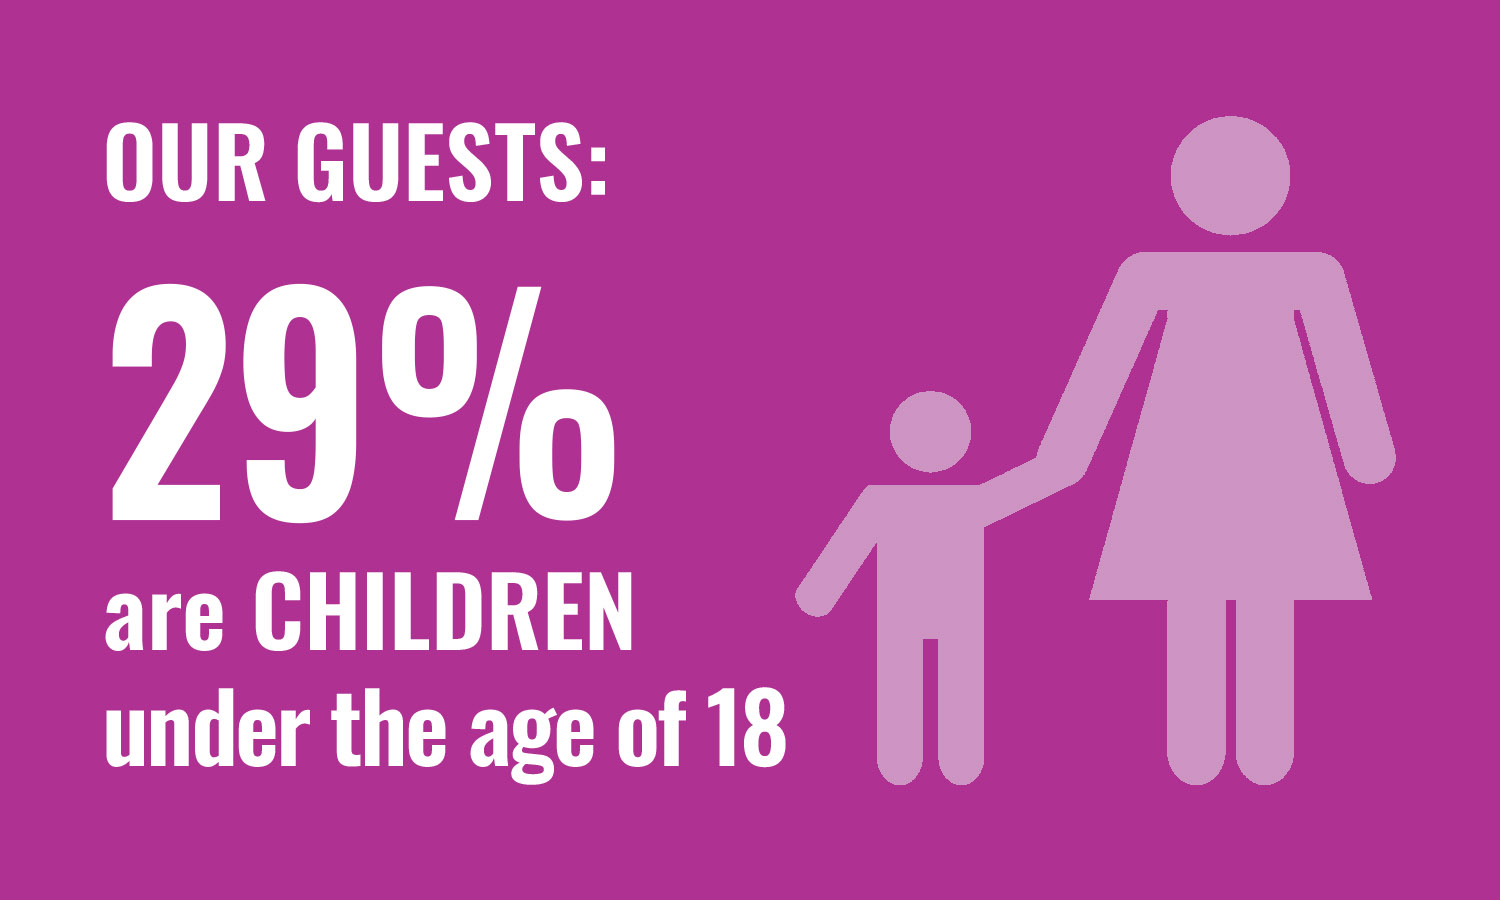 29% of our guests are children